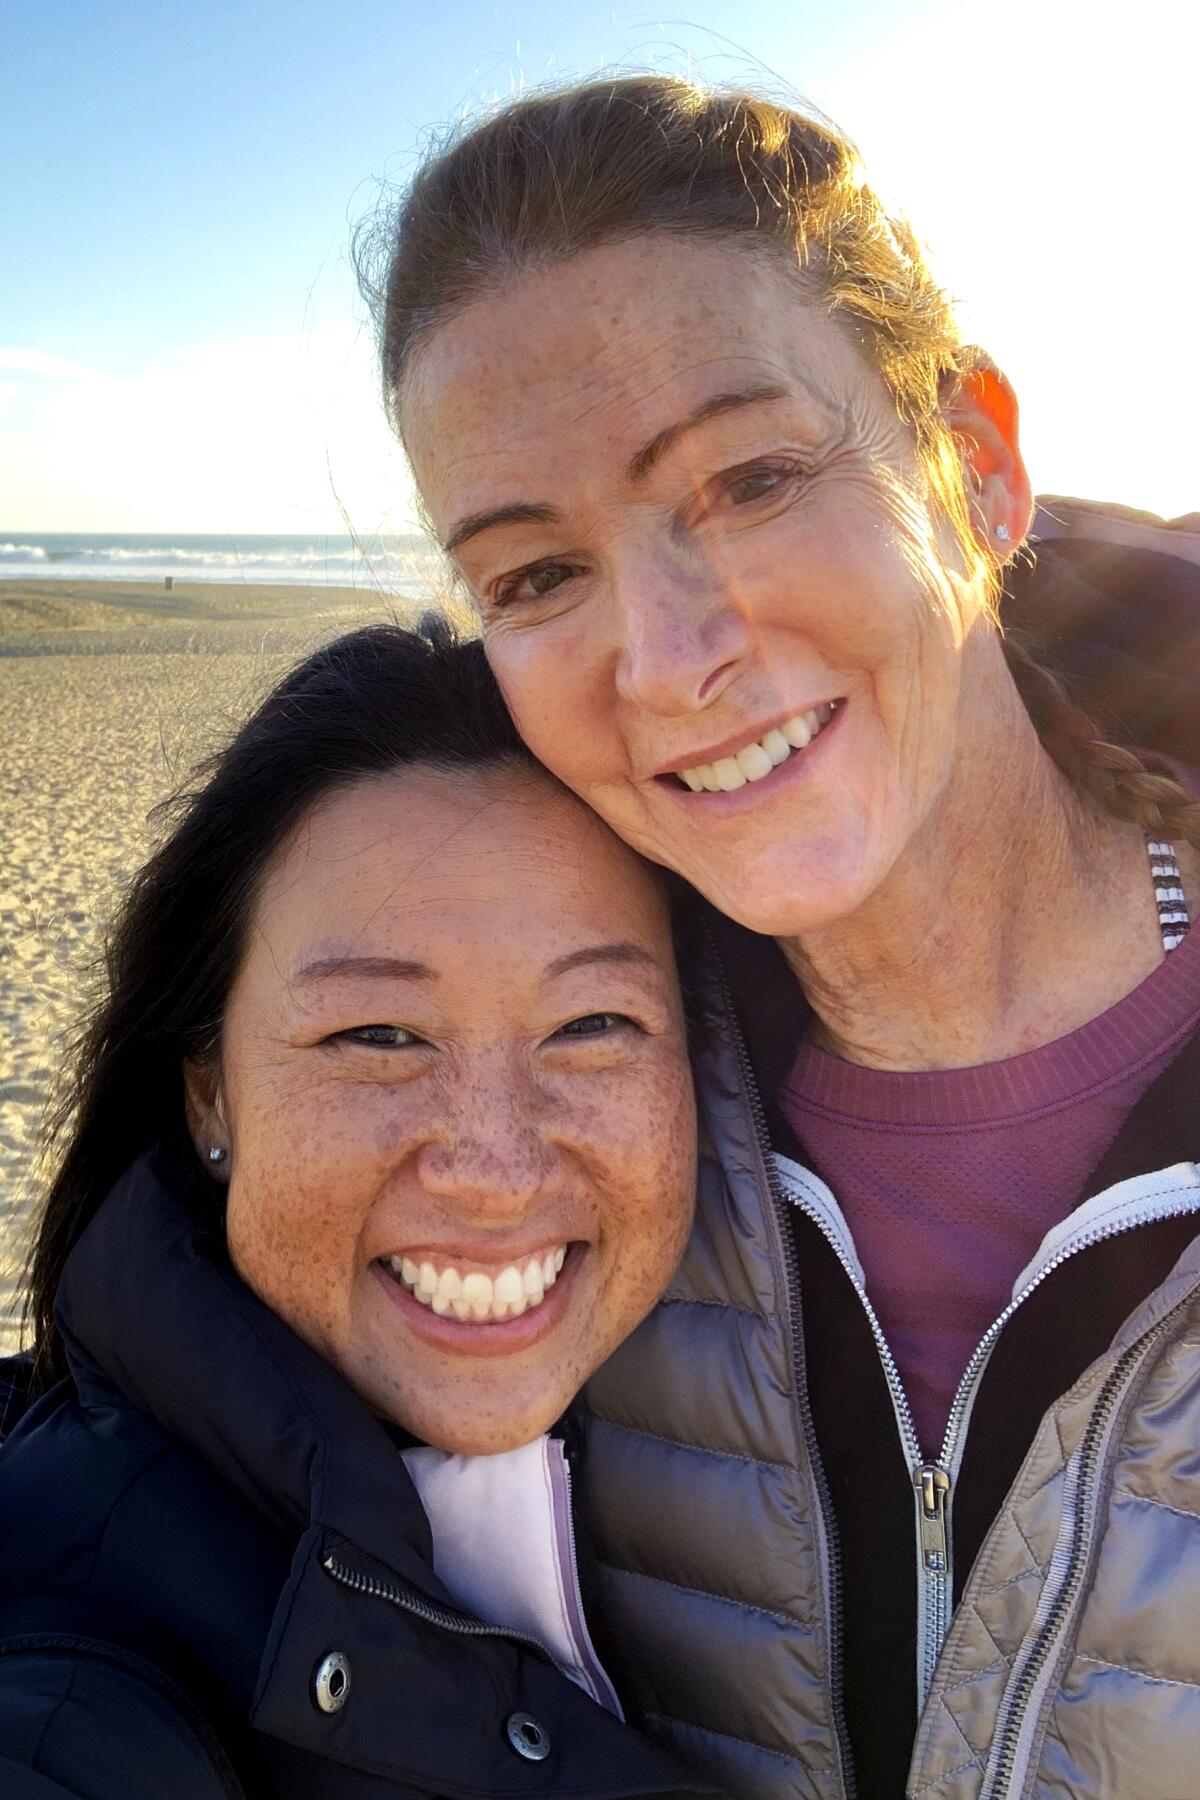 Jennifer Moore, right, and her wife, Mika, at the beach for their yoga sessions.